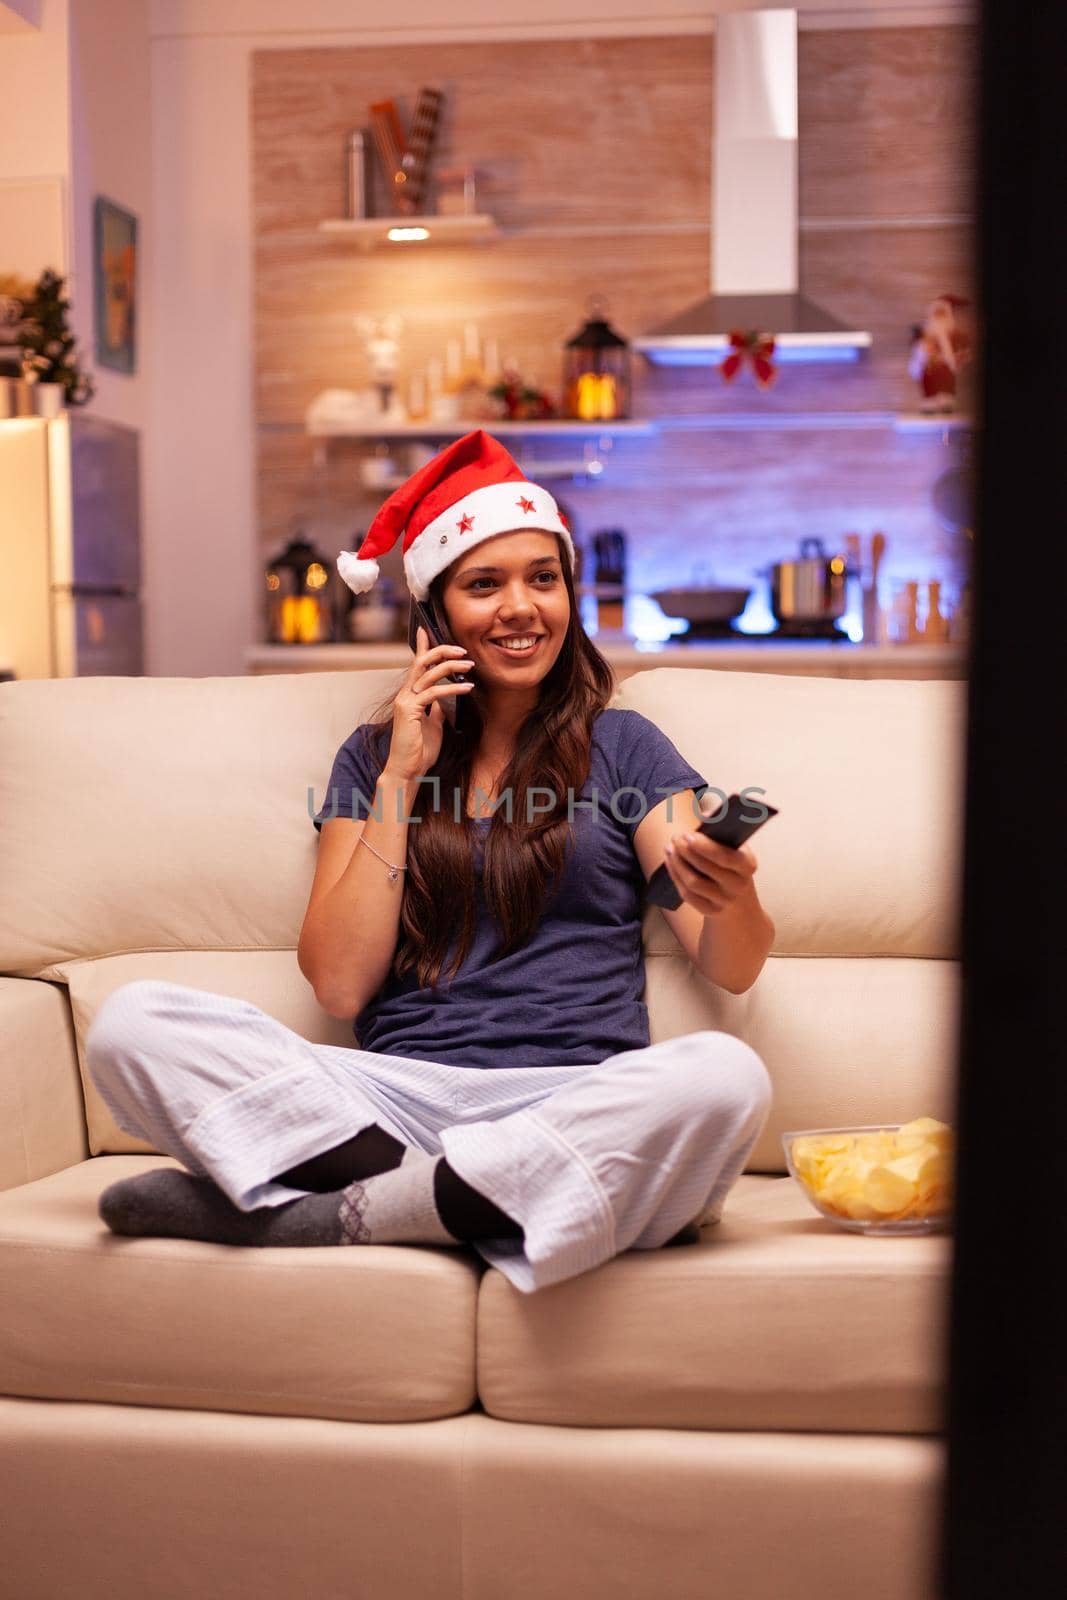 Adult person in sitting on couch talking at phone with friend celebrating christmas holiday by DCStudio